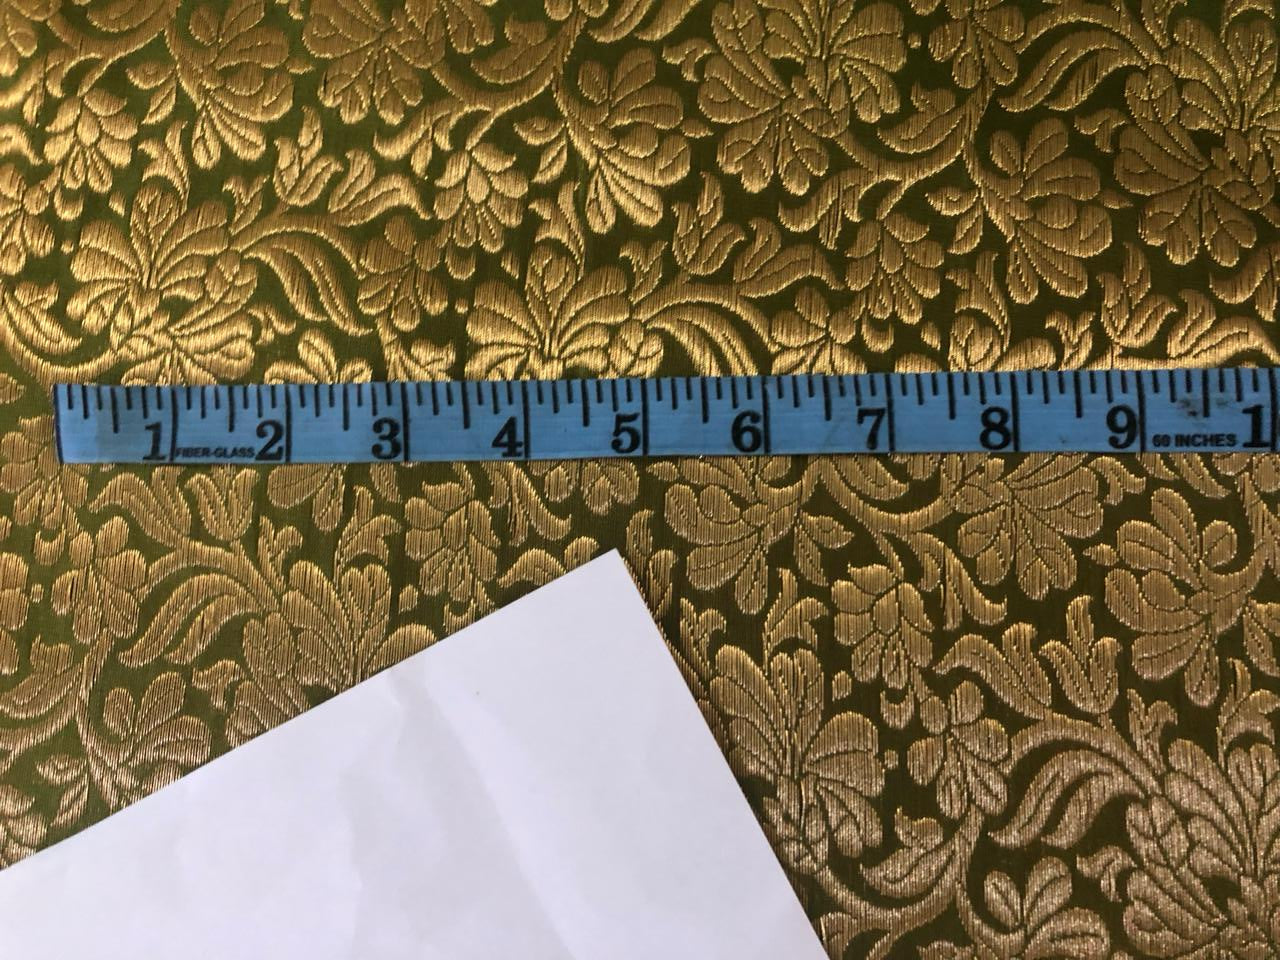 Silk Brocade fabric 44" wide Floral Jacquard beautiful shading of green and gold BRO926[1]